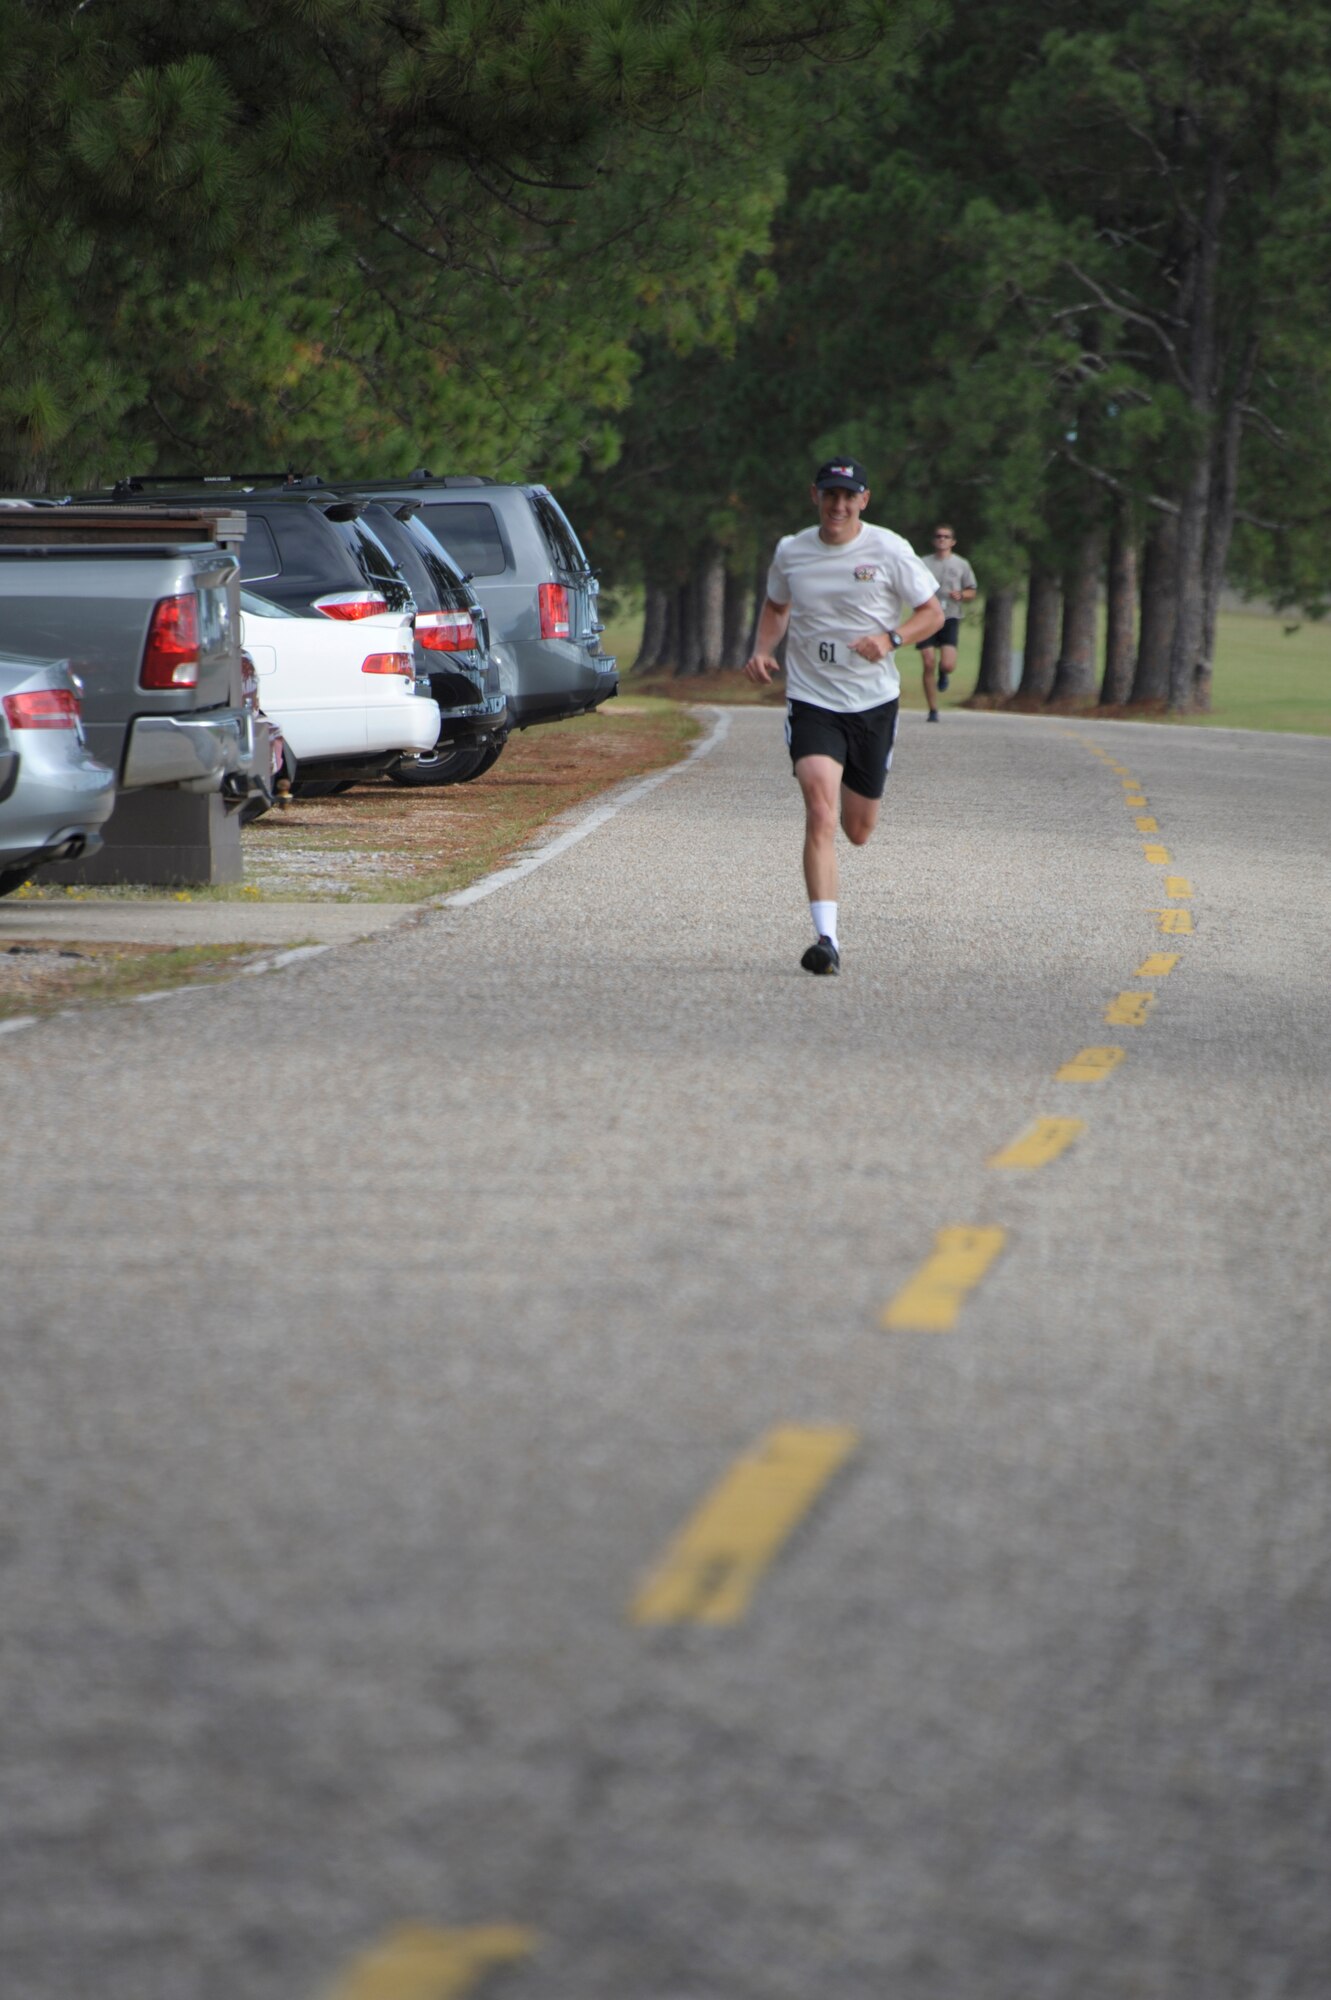 Maj. Shane Rogers, student from Air Command and Staff College, competes in a 5K race on Maxwell Air Force Base, Oct. 8. The race was part of a 2-day competition between ACSC and Air War College, compiling of approximately 20 events, both scholastic and athletic. (U.S. Air Force photo by Airman 1st Class William Blankenship)